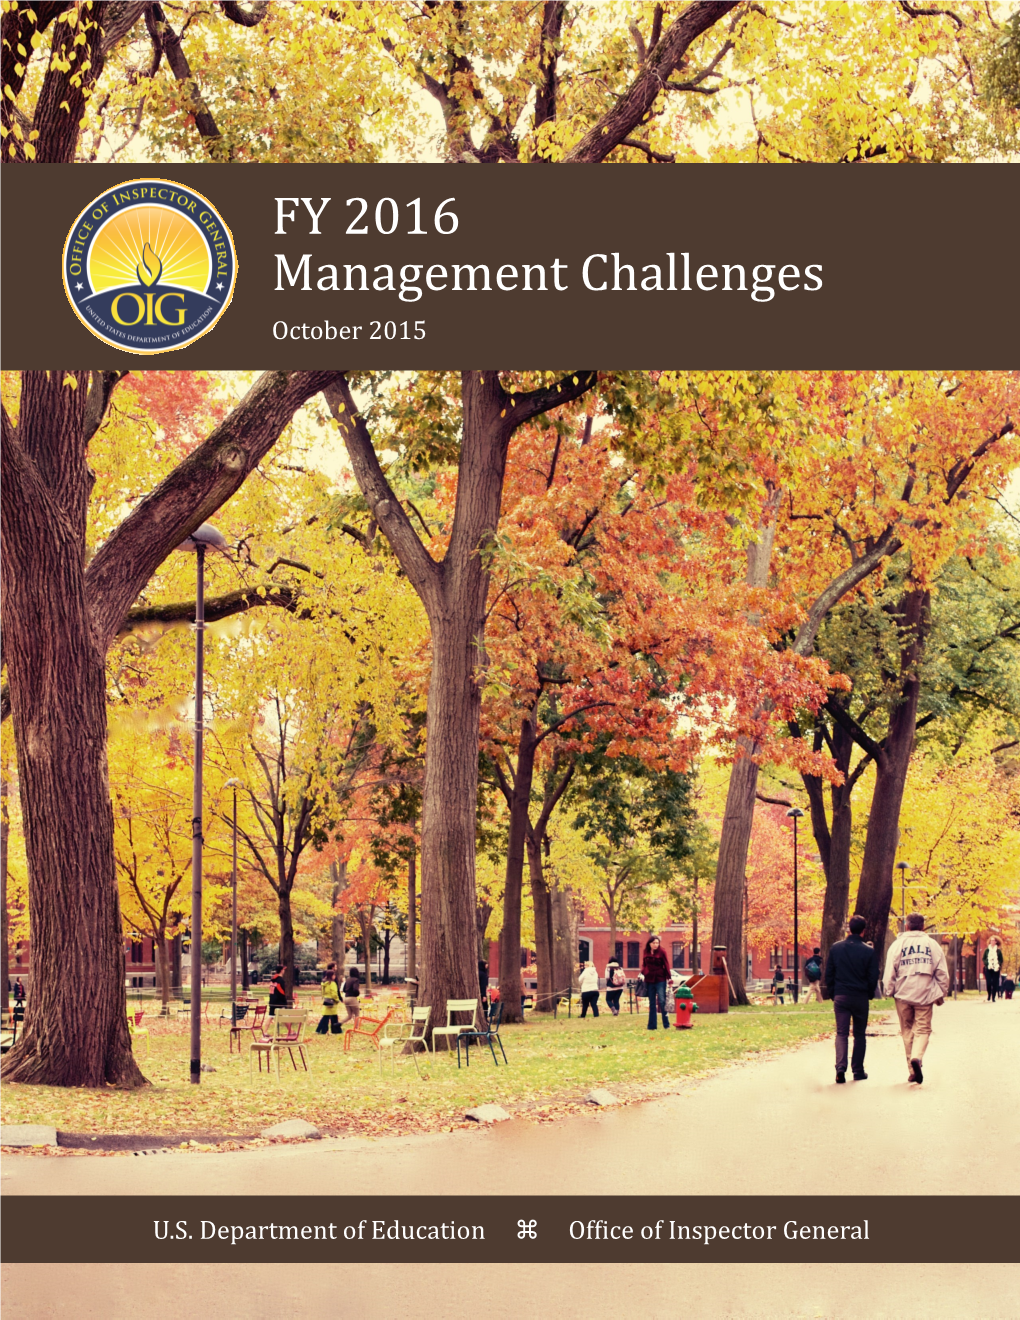 FY 2016 Management Challenges for U.S. Department of Education